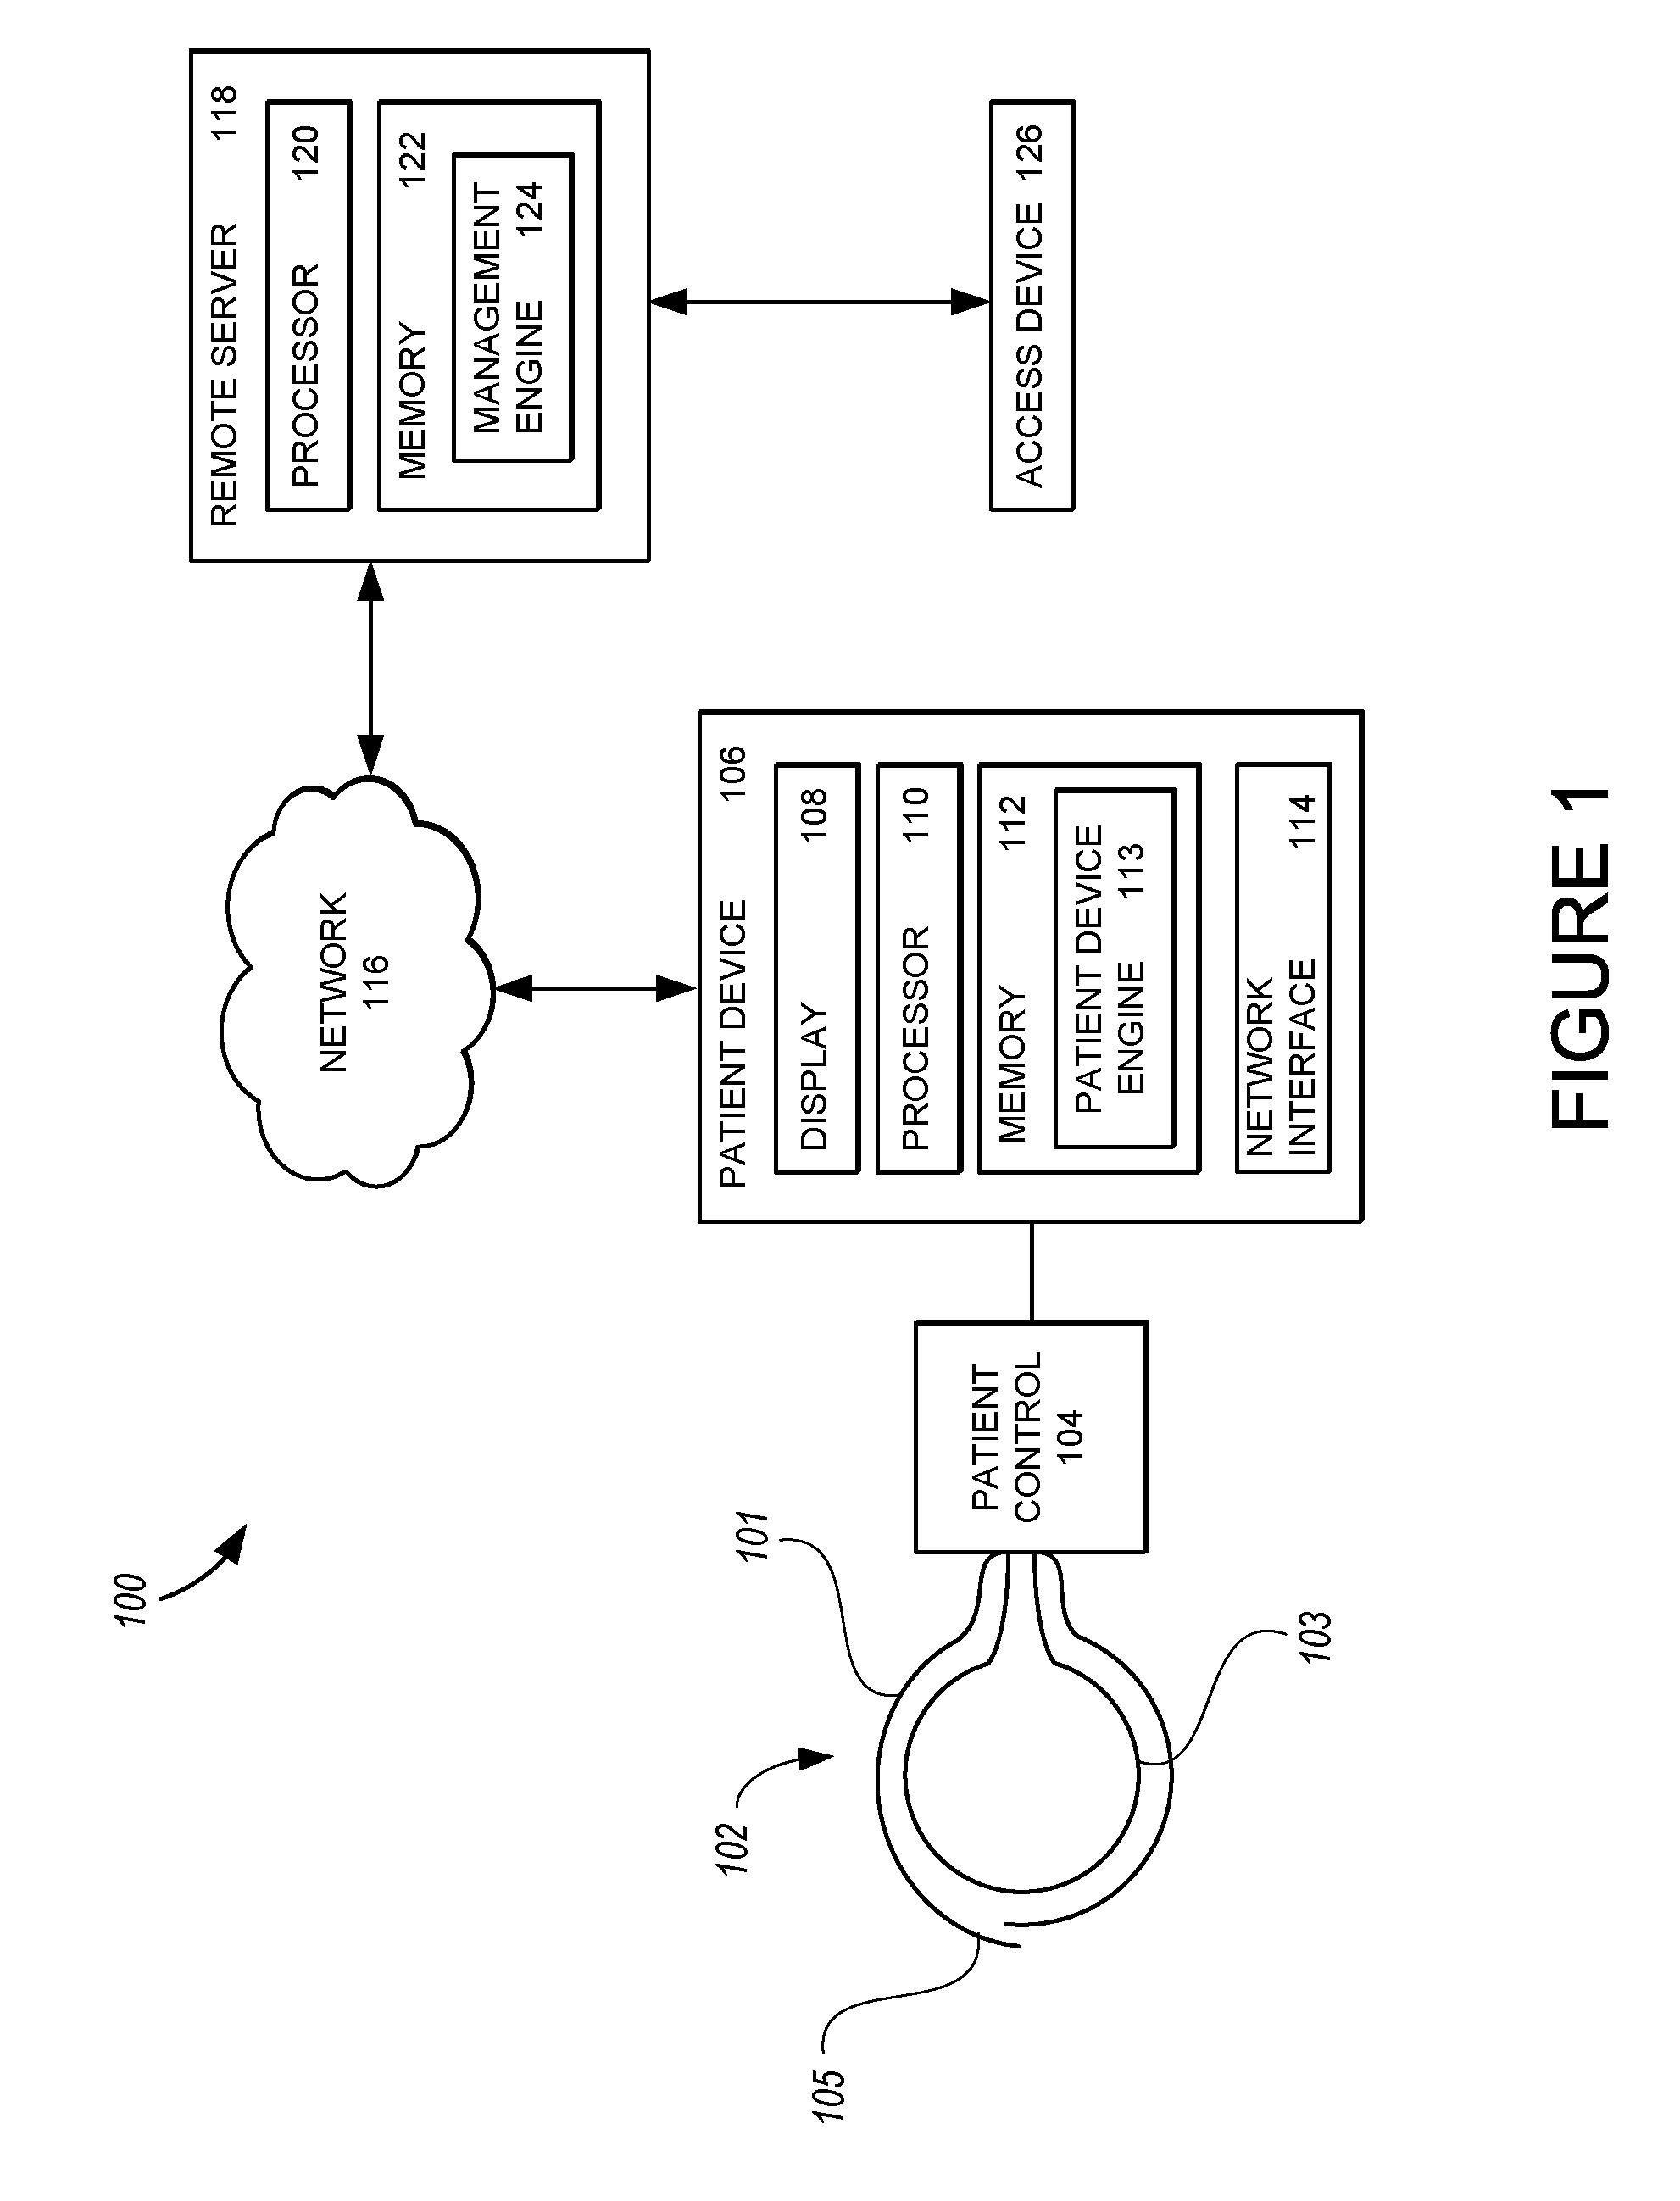 Physiological data acquisition and management system for use with an implanted wireless sensor